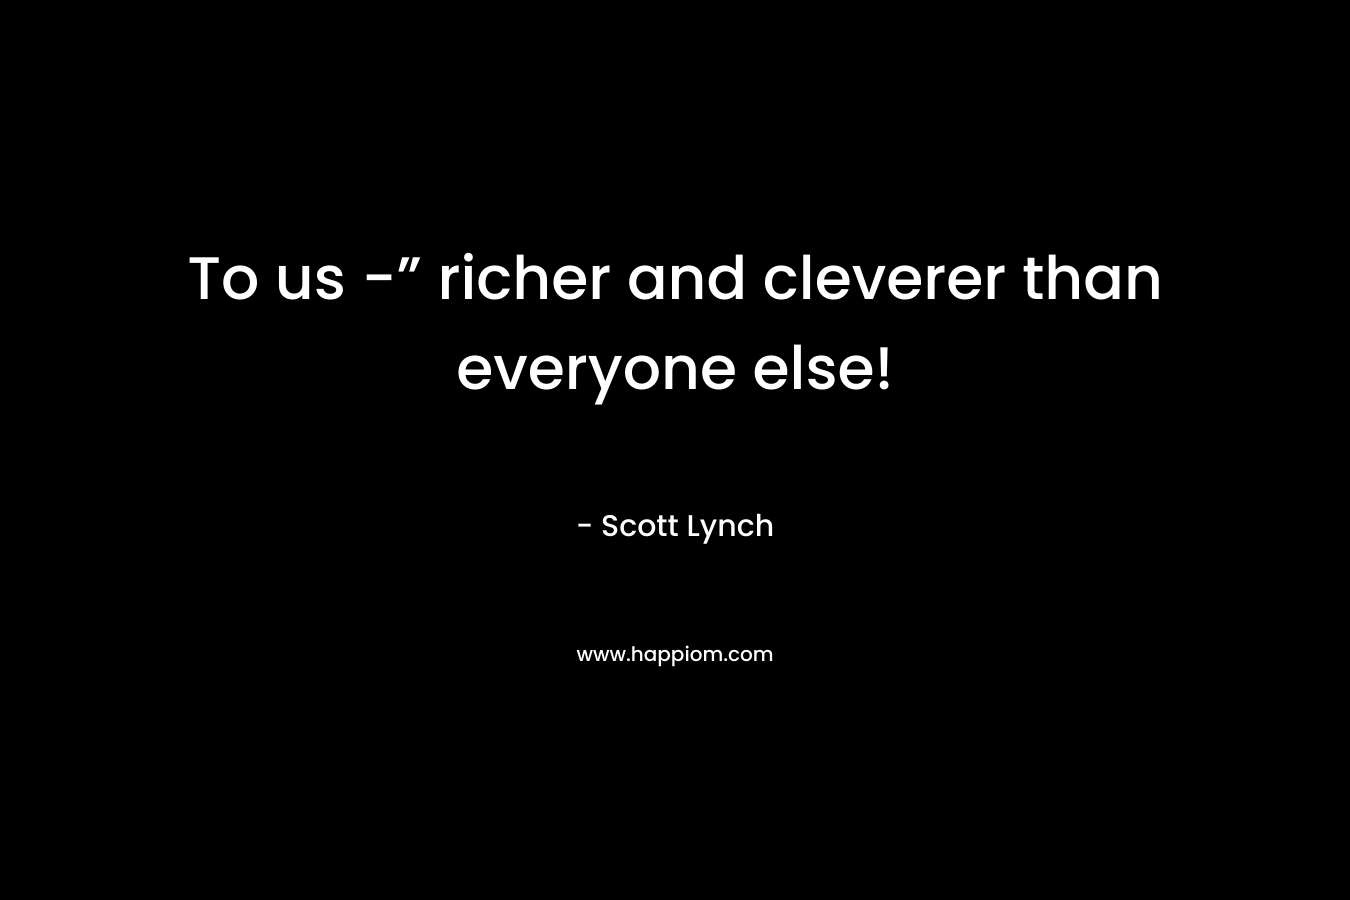 To us -” richer and cleverer than everyone else!